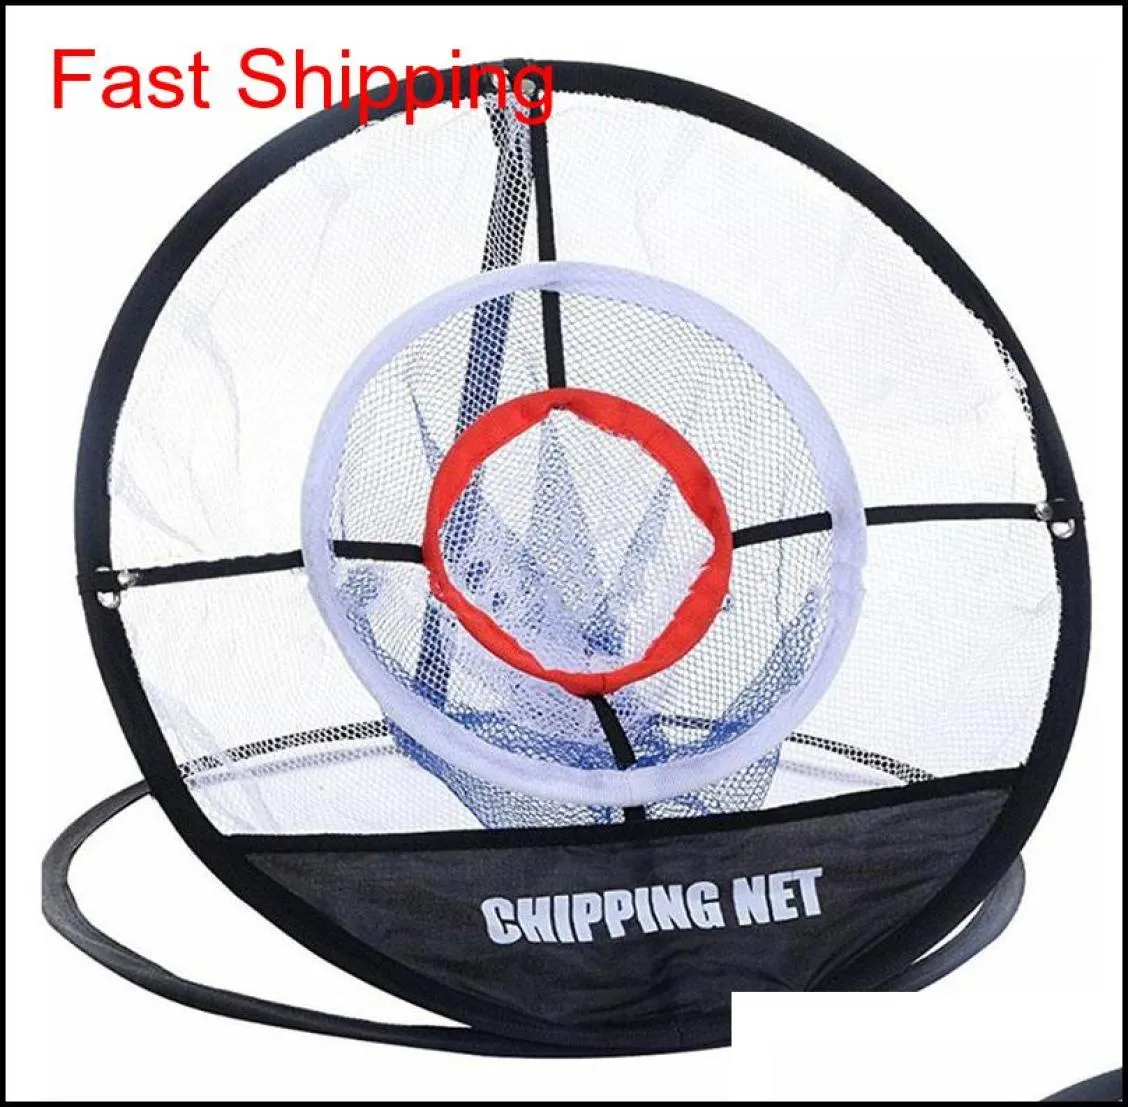 Golf Up Indoor Outdoor Chipping Pitching Cages Matten Üben Easy Net Golf Training AIDS Metal Net H7LOF A3RG1 N1UJC CXPKJ MWZJD5964031